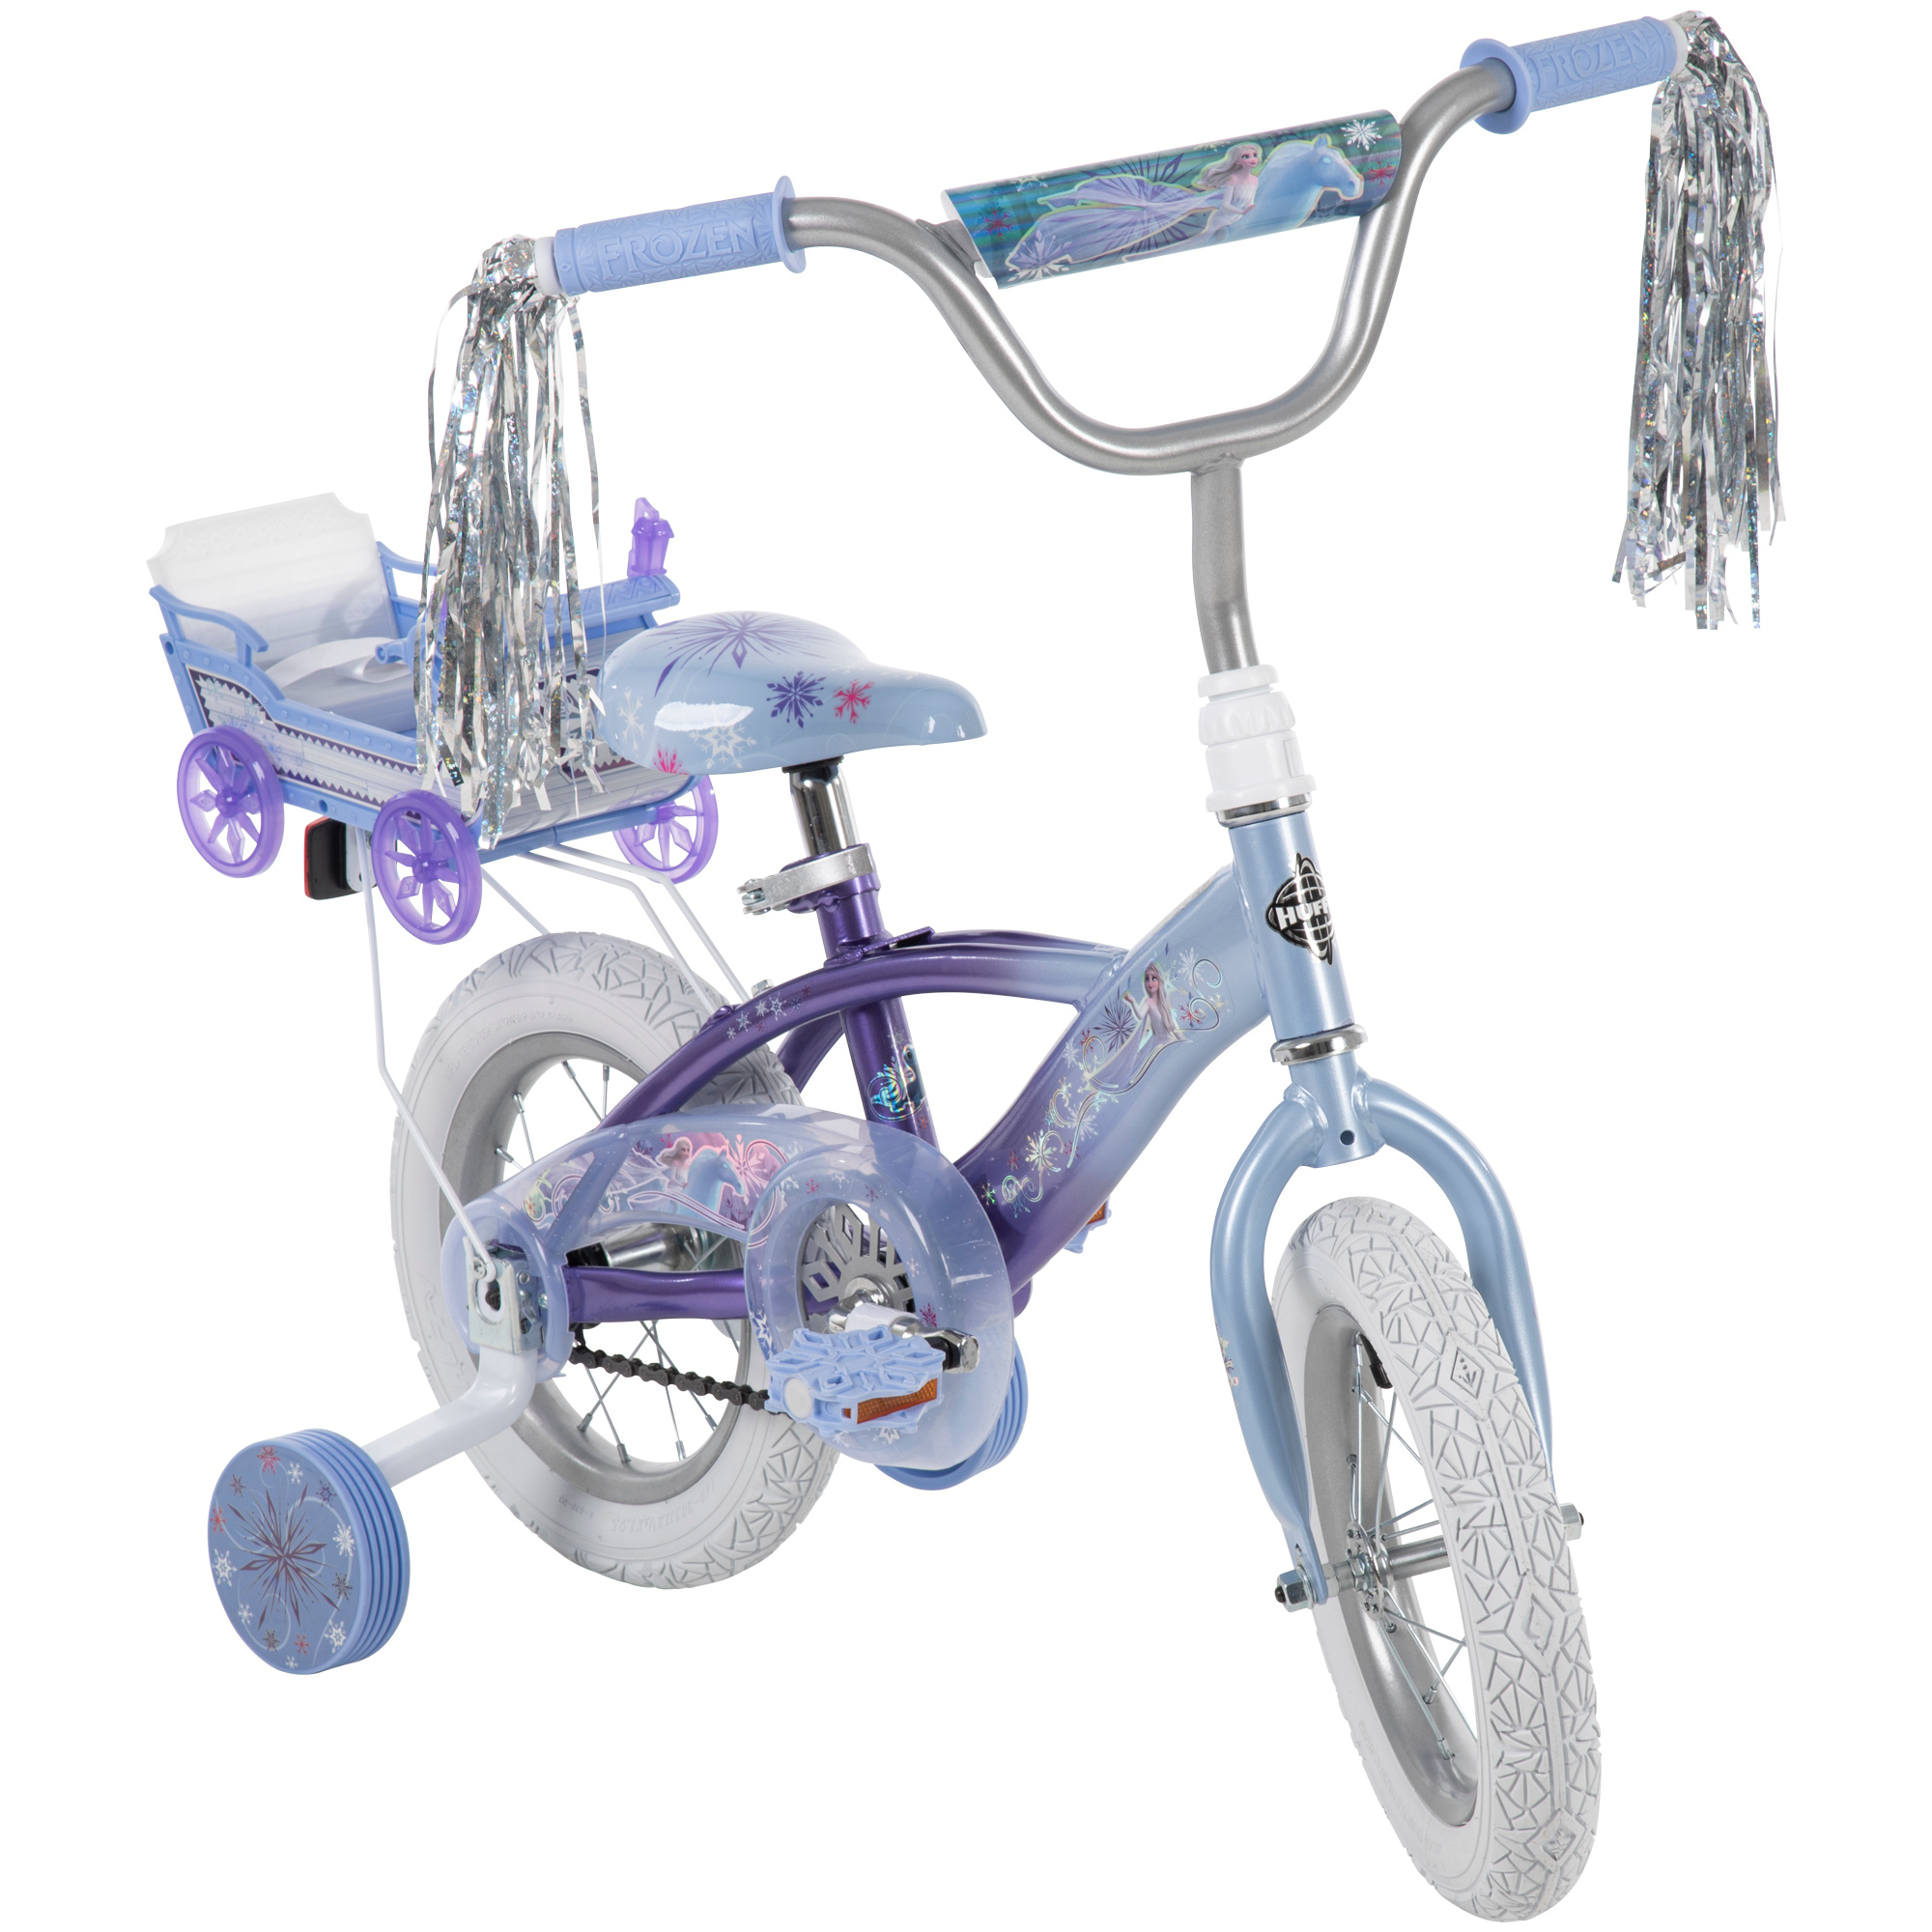 Disney Frozen 12 in. Bike with Doll Carrier Sleigh for Girl's, Ages 2+ Years, White and Purple by Huffy - image 17 of 19